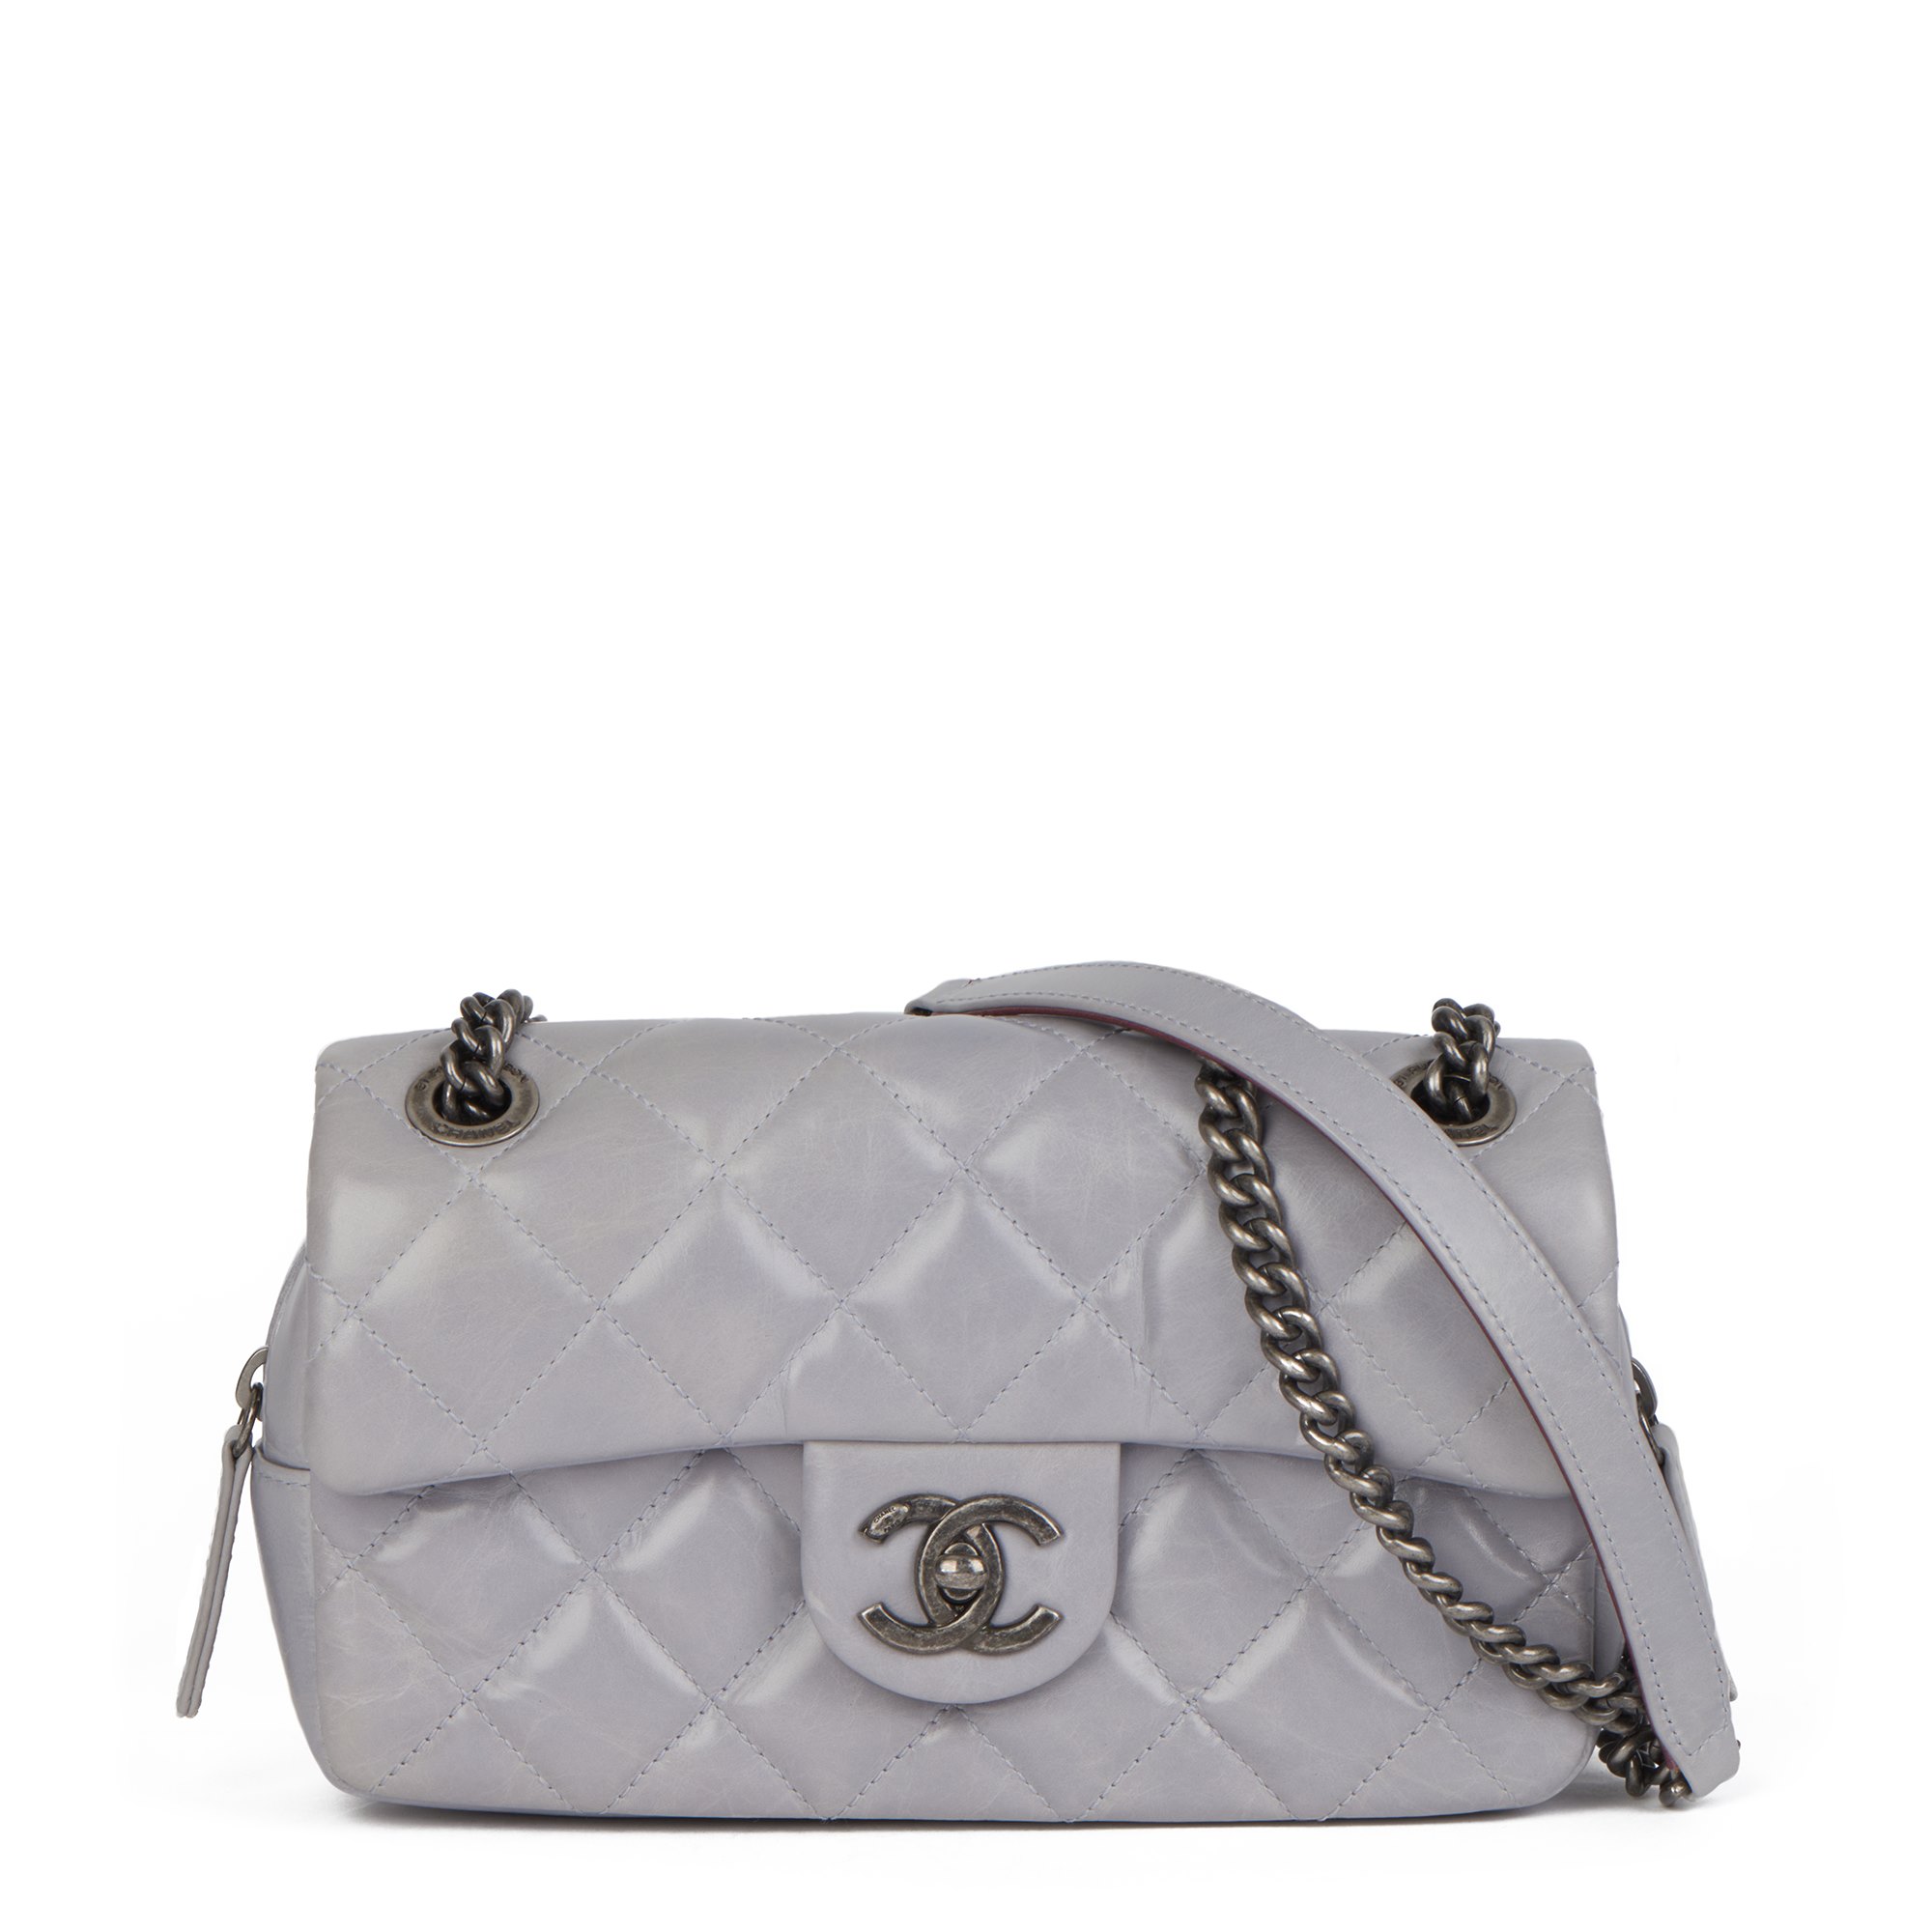 Chanel Grey Quilted Shiny Calfskin Leather Mini Easy Carry Flap Bag